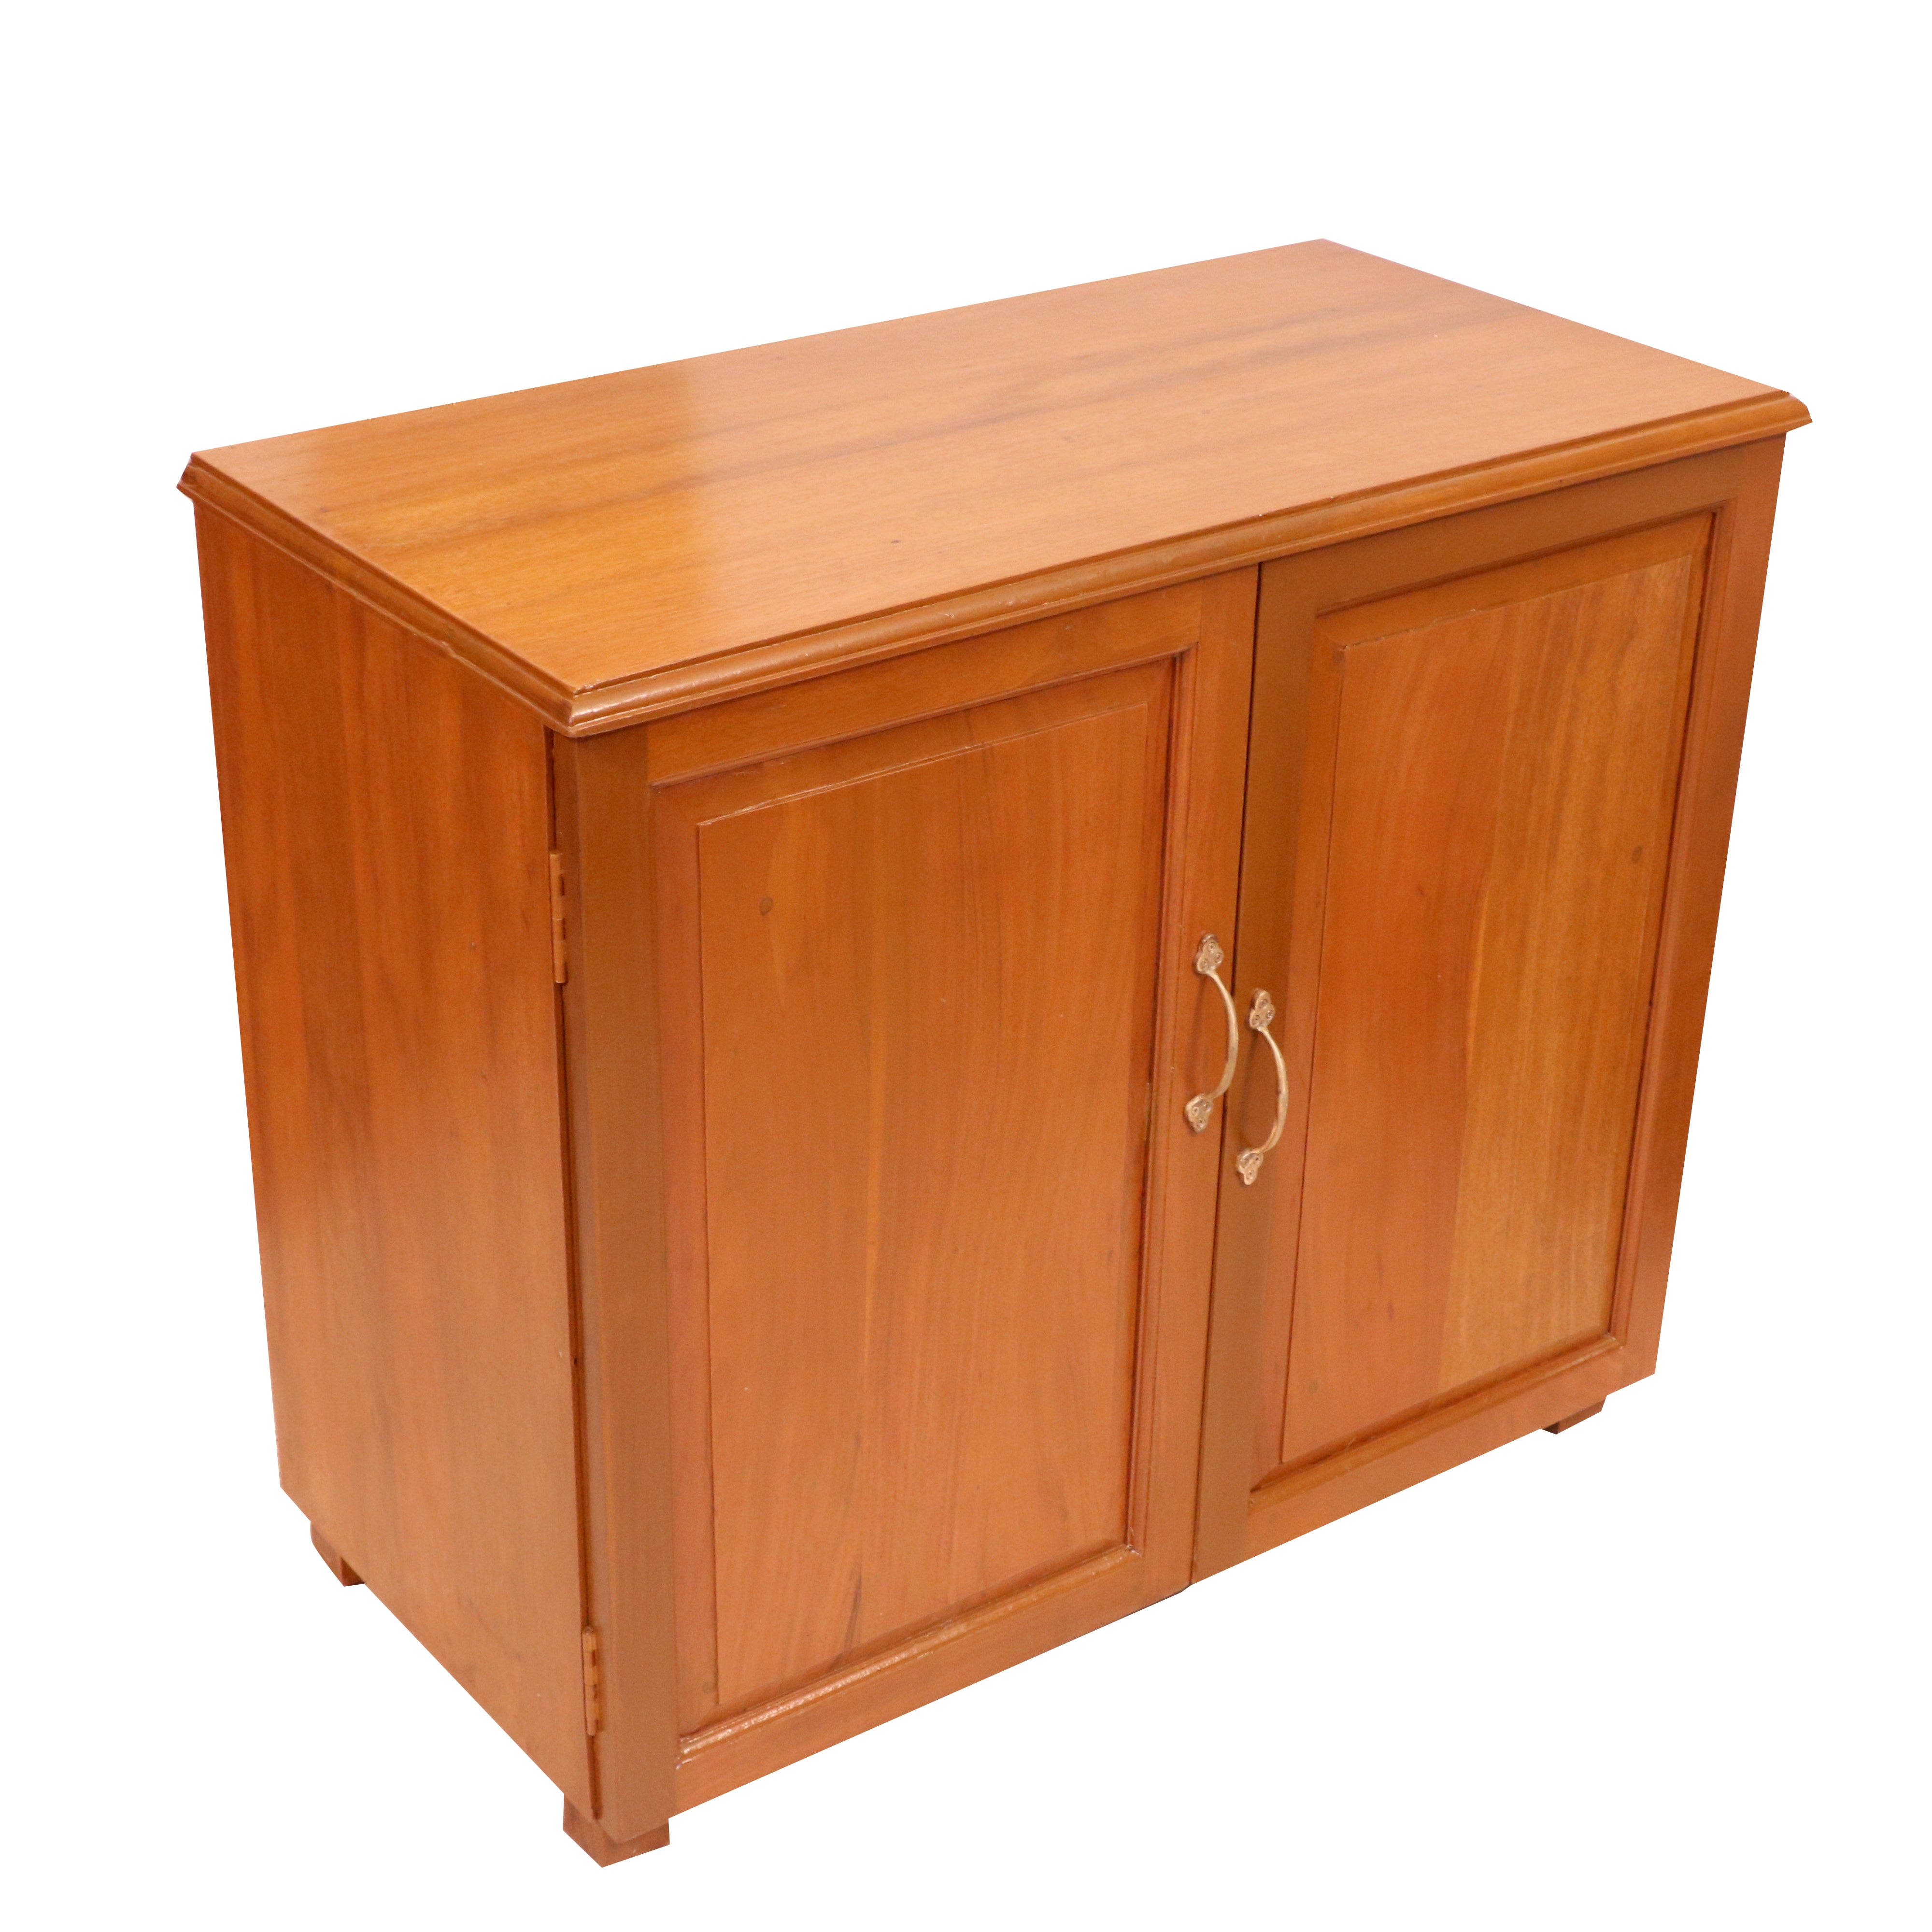 Eastern Light Finish Handmade Indian Wooden Multi-Storage Cabinet for Home Cupboard